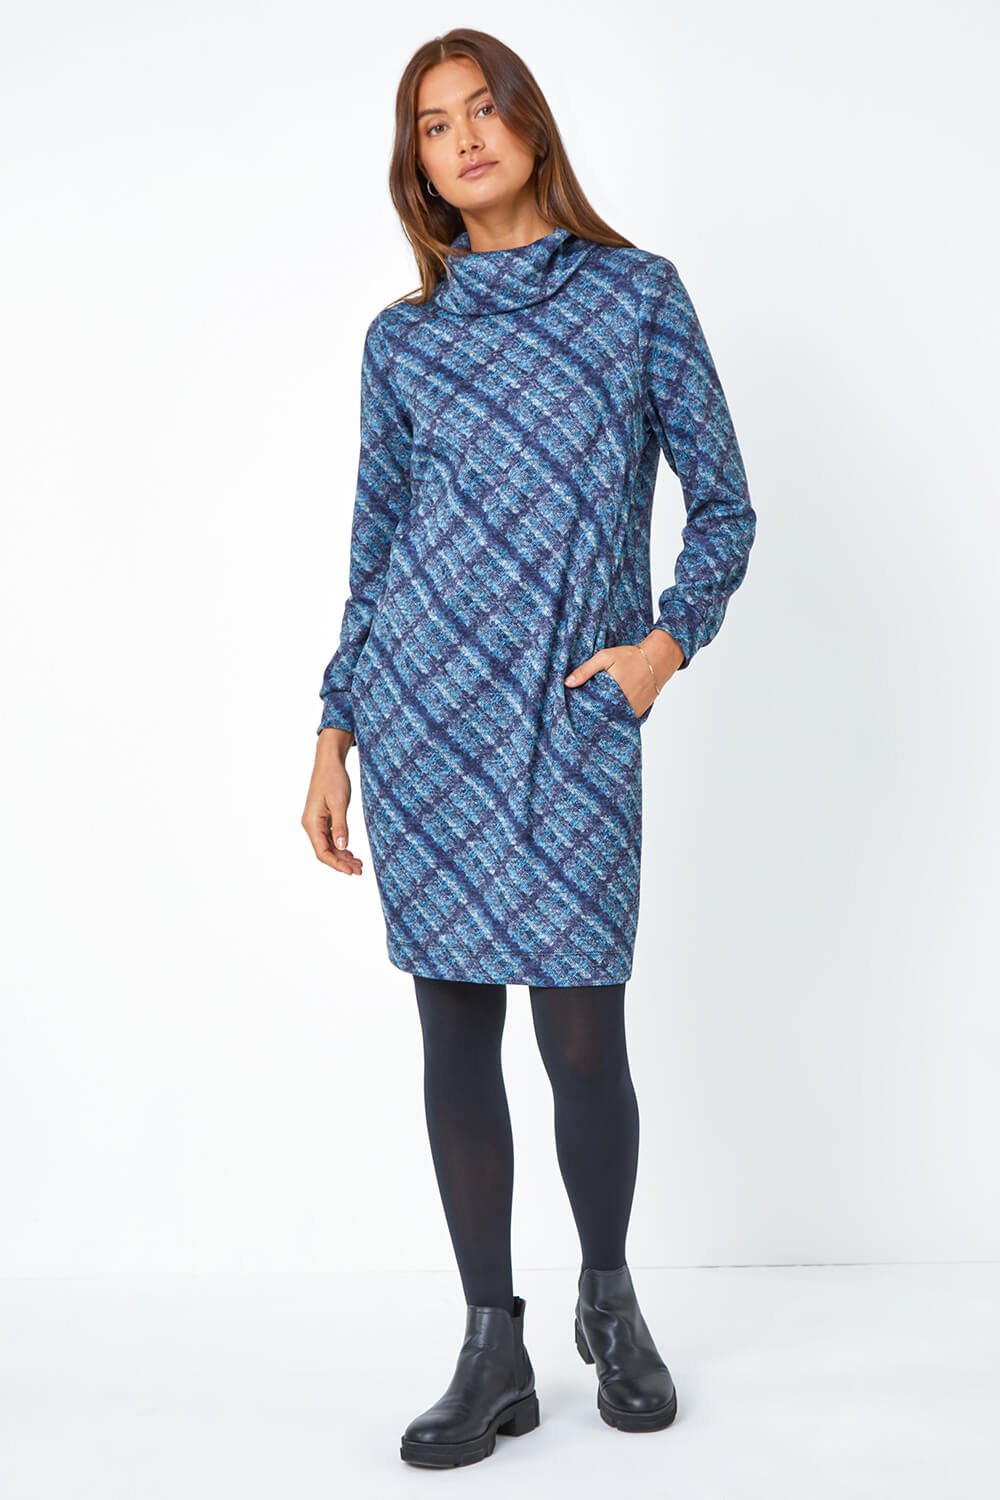 Blue Checked Cowl Neck Stretch Dress, Image 2 of 4